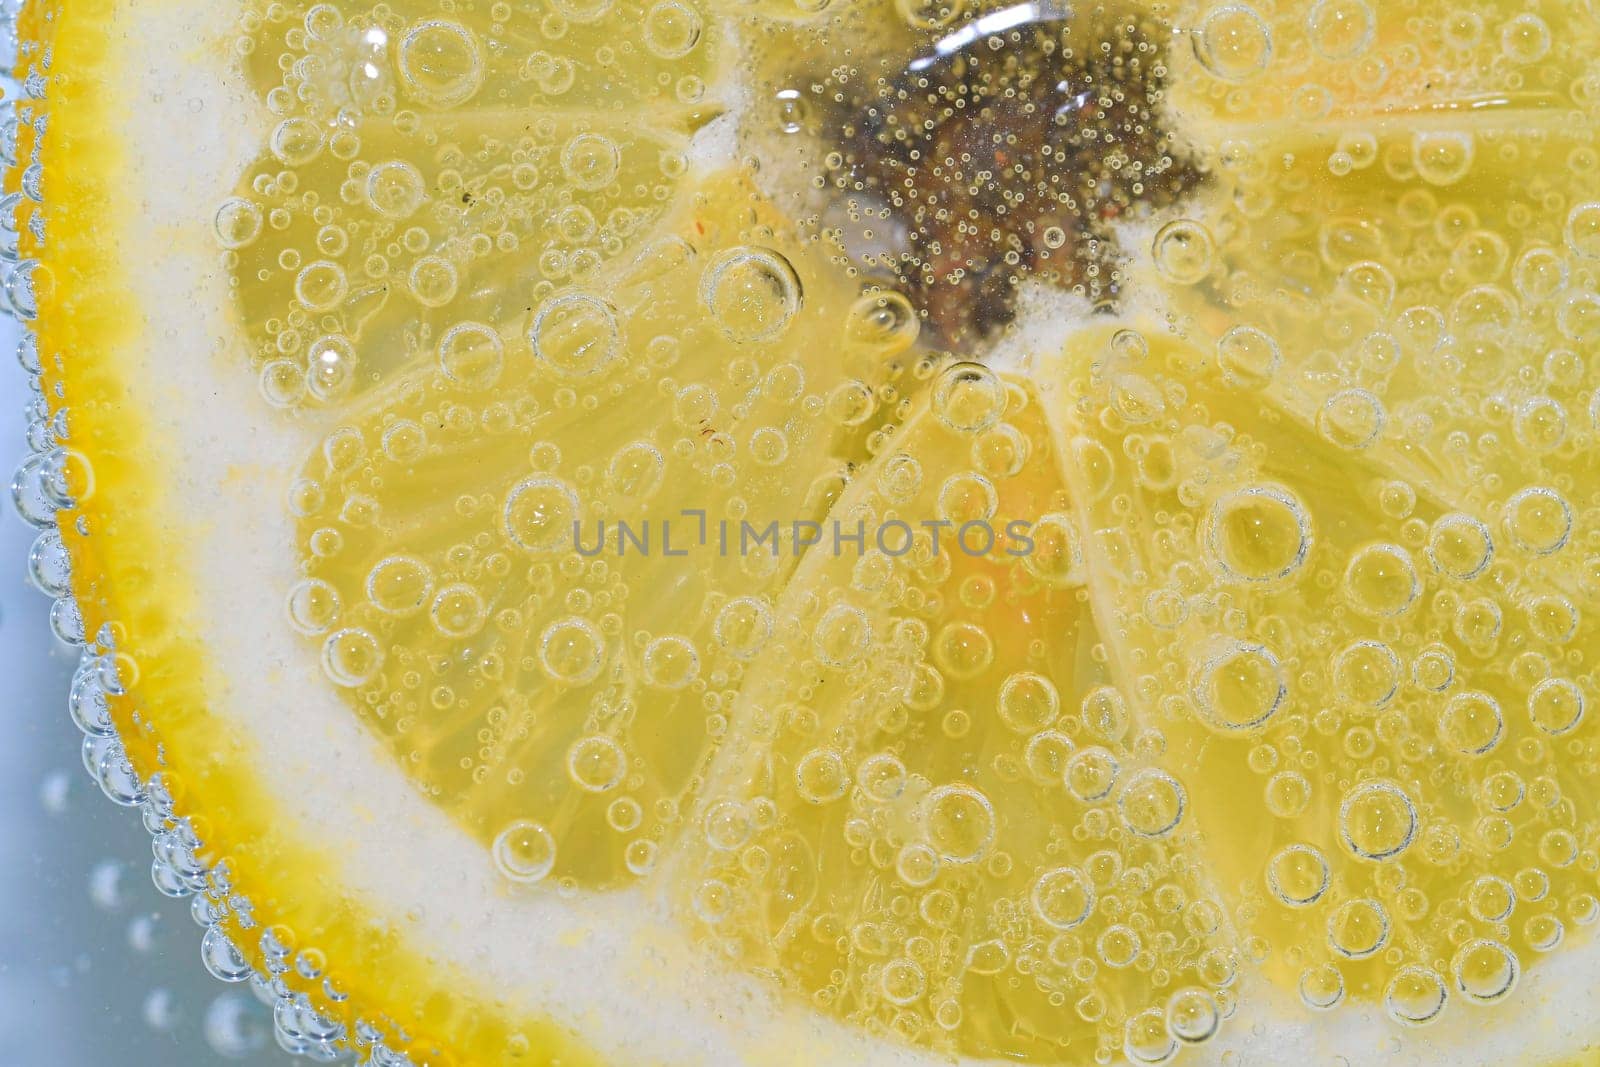 Close-up of a lemon slice in liquid with bubbles. Slice of ripe lemon in water. Close-up of fresh citron slice covered by bubbles. Macro horizontal image